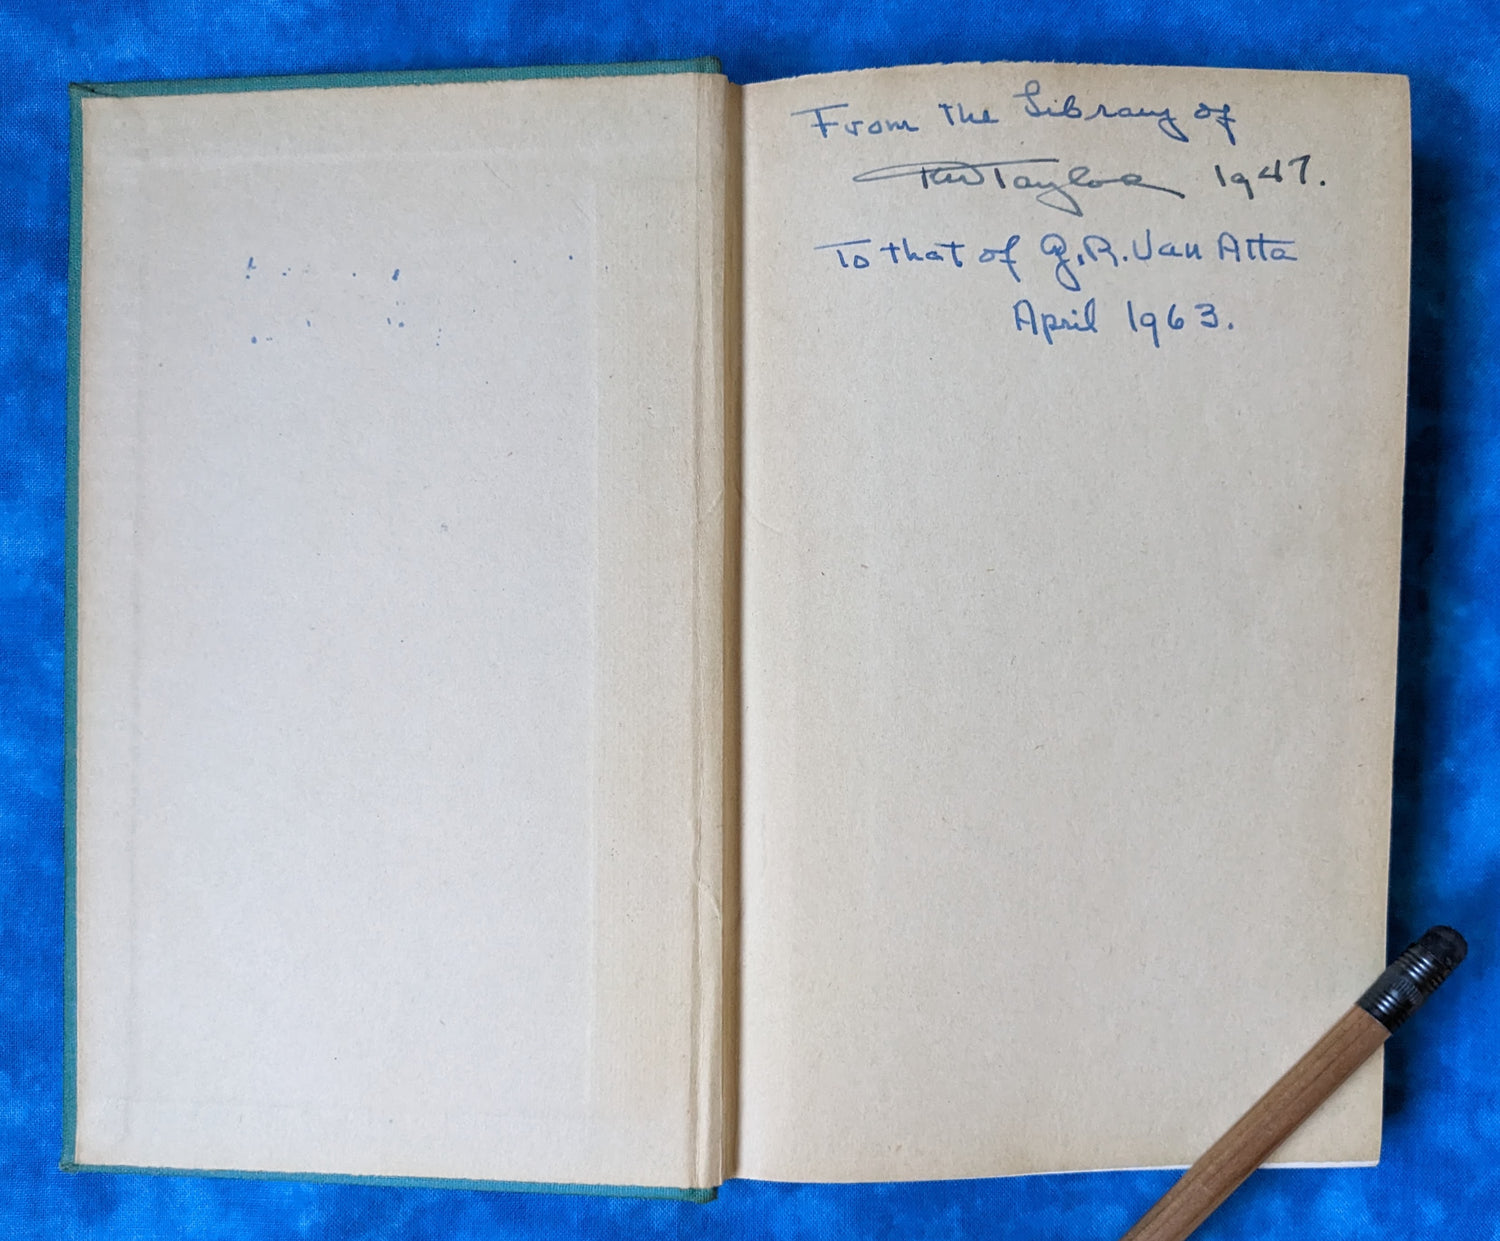 A Field Guide to Western Birds vintage book inside cover with handwritten notes